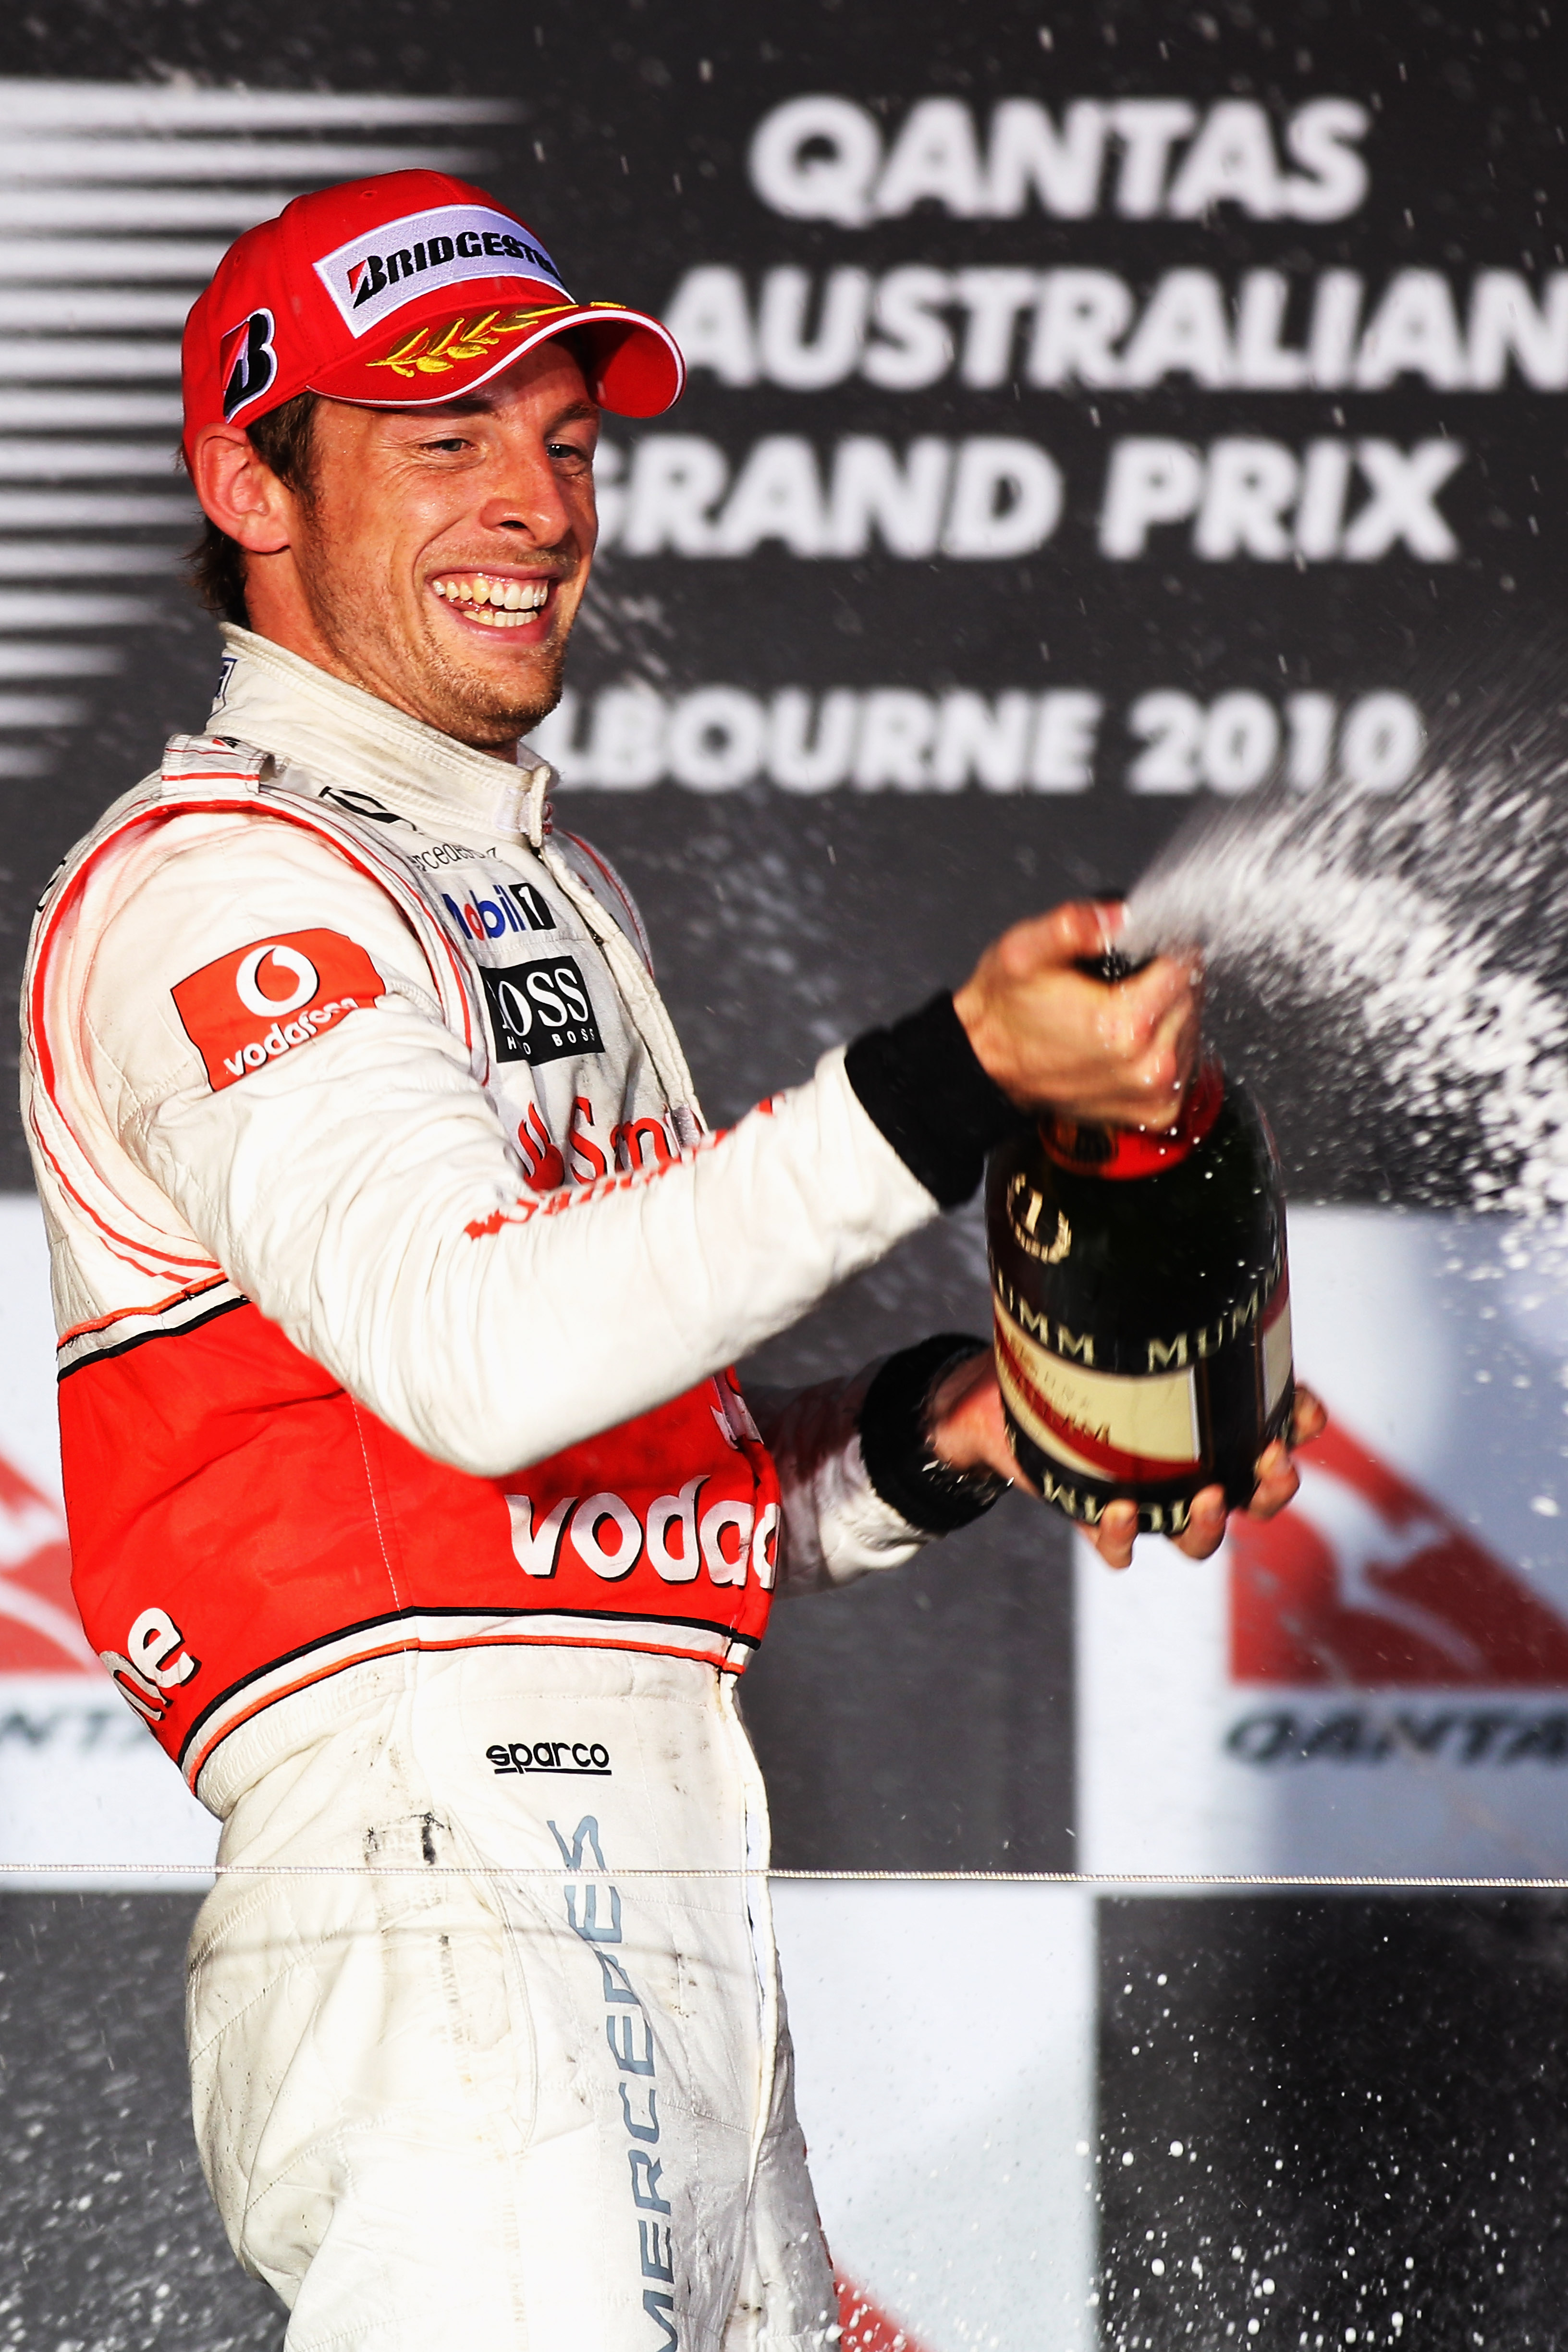 MELBOURNE, AUSTRALIA - MARCH 28:  Jenson Button of Great Britain and McLaren Mercedes celebrates winning the the Australian Formula One Grand Prix at the Albert Park Circuit on March 28, 2010 in Melbourne, Australia.  (Photo by Mark Thompson/Getty Images)